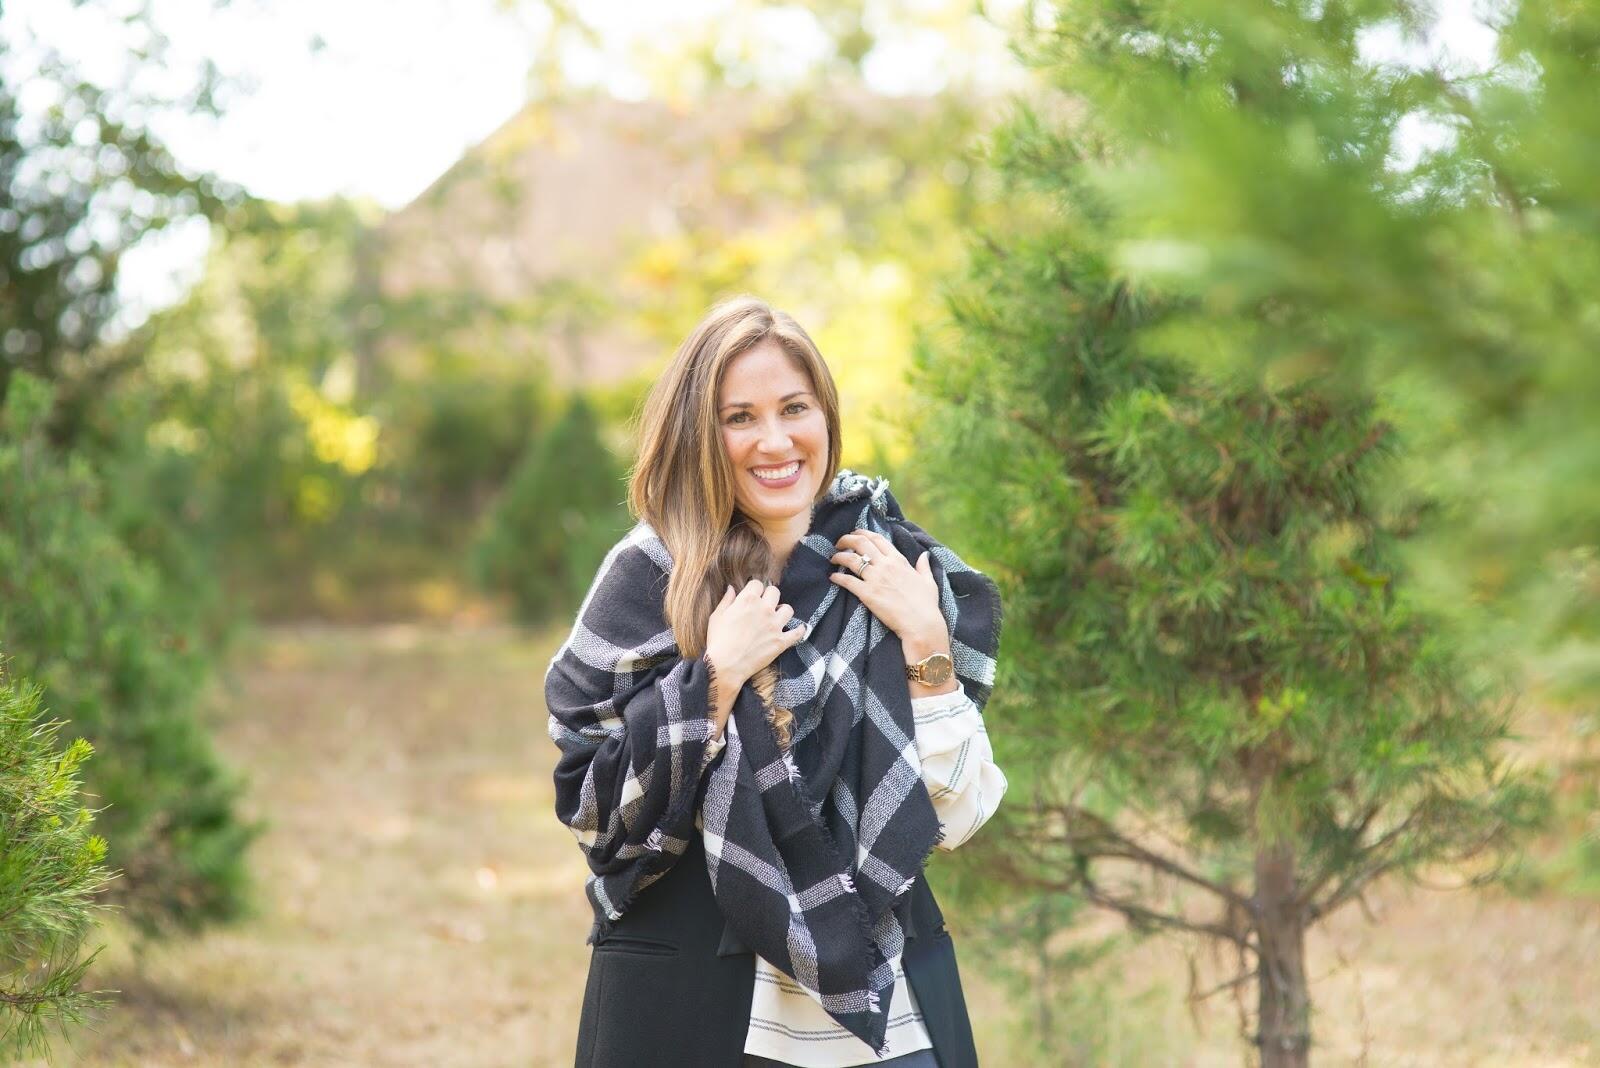 How to Wear a Blanket Scarf: 6 ways featured by top Memphis fashion blogger, Walking in Memphis in High Heels.